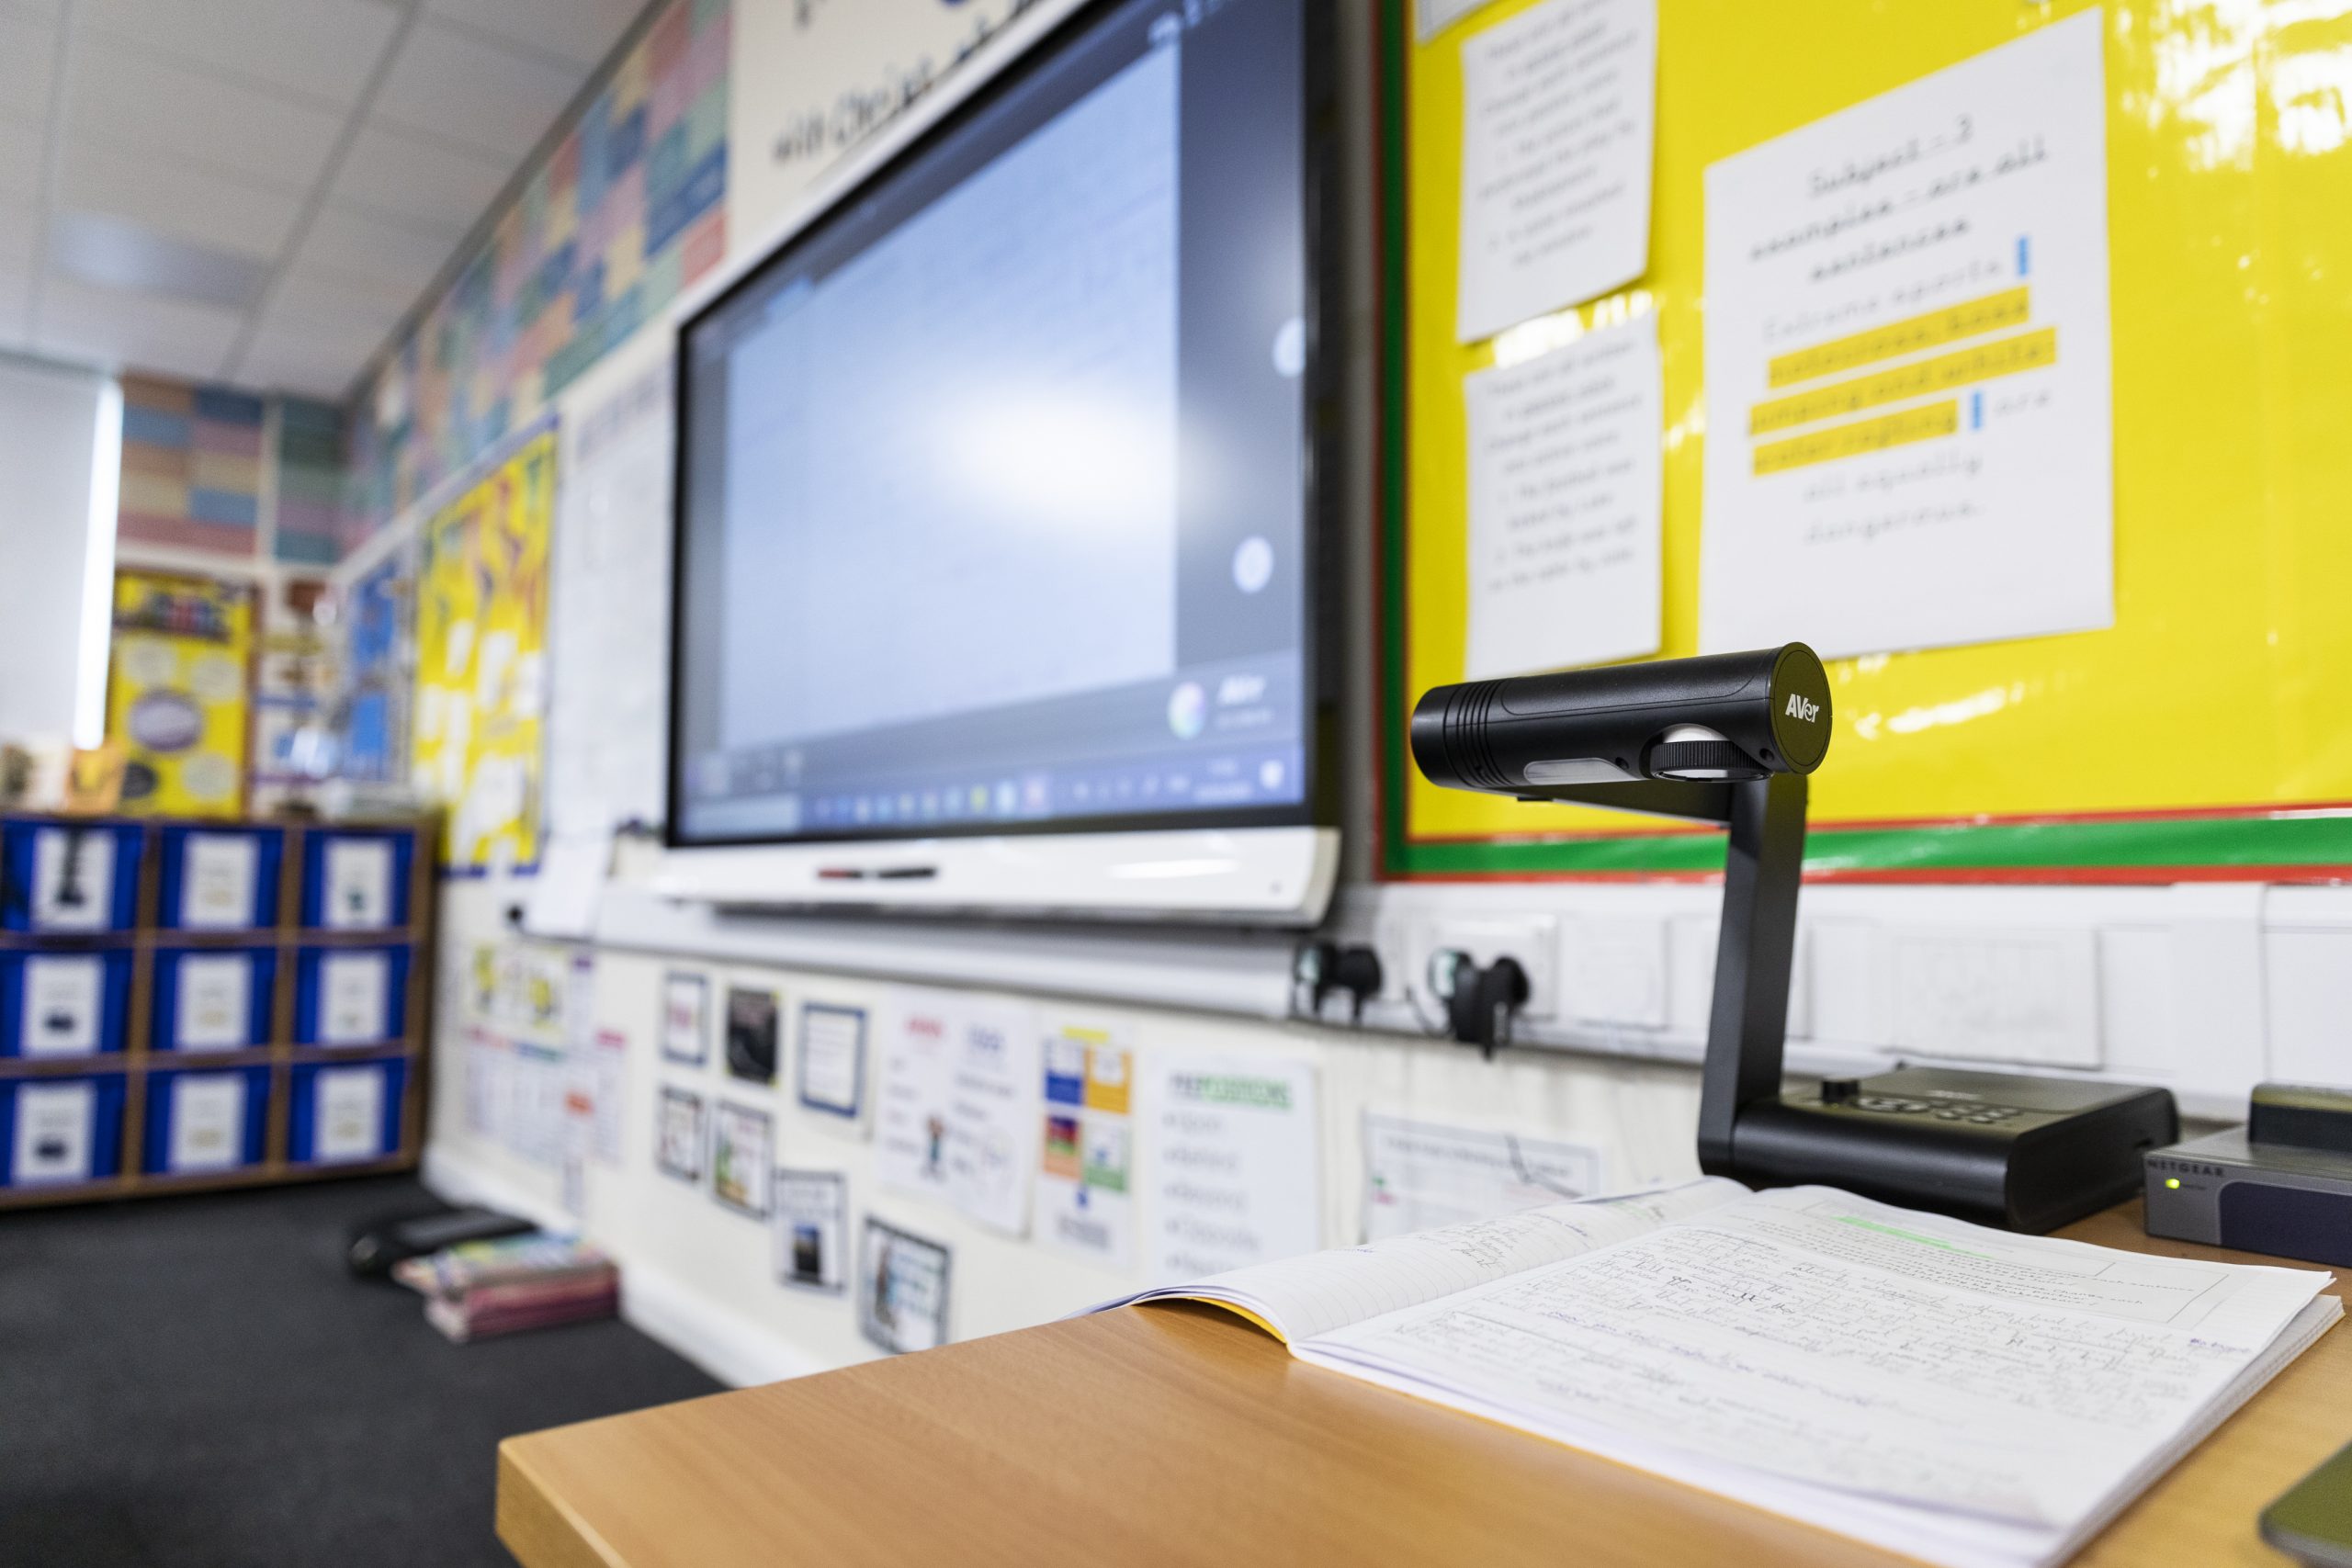 The front of a primary school classroom showing an interactive touchscreen board and a visualiser.